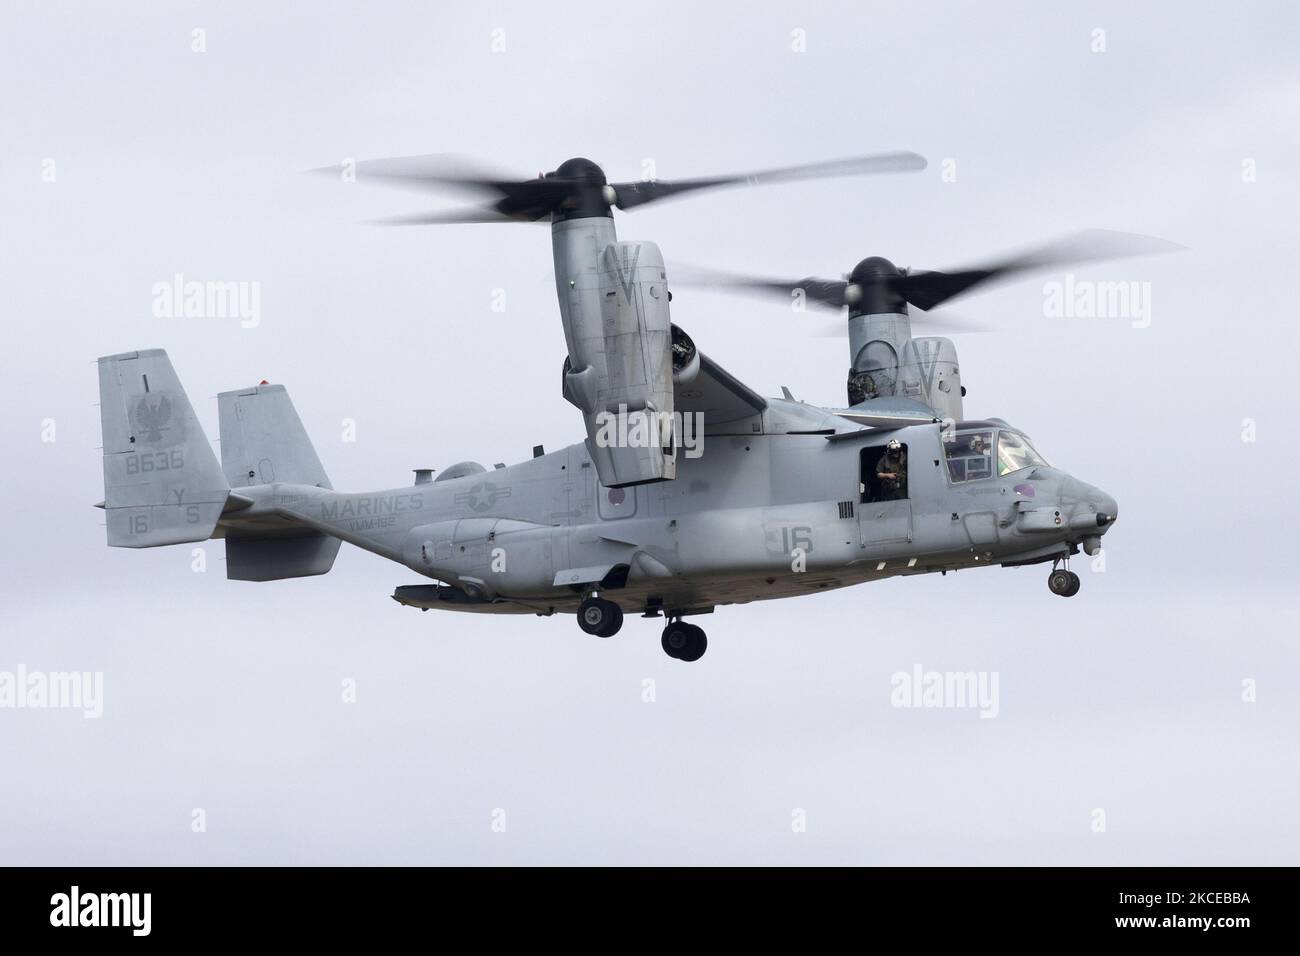 A US Navy Marines MV-22 Osprey Helicopter aircraft takes off at Leuchars Air Station, Scotland on Monday 10th May 2021. (Photo by Robert Smith/MI News/NurPhoto) Stock Photo